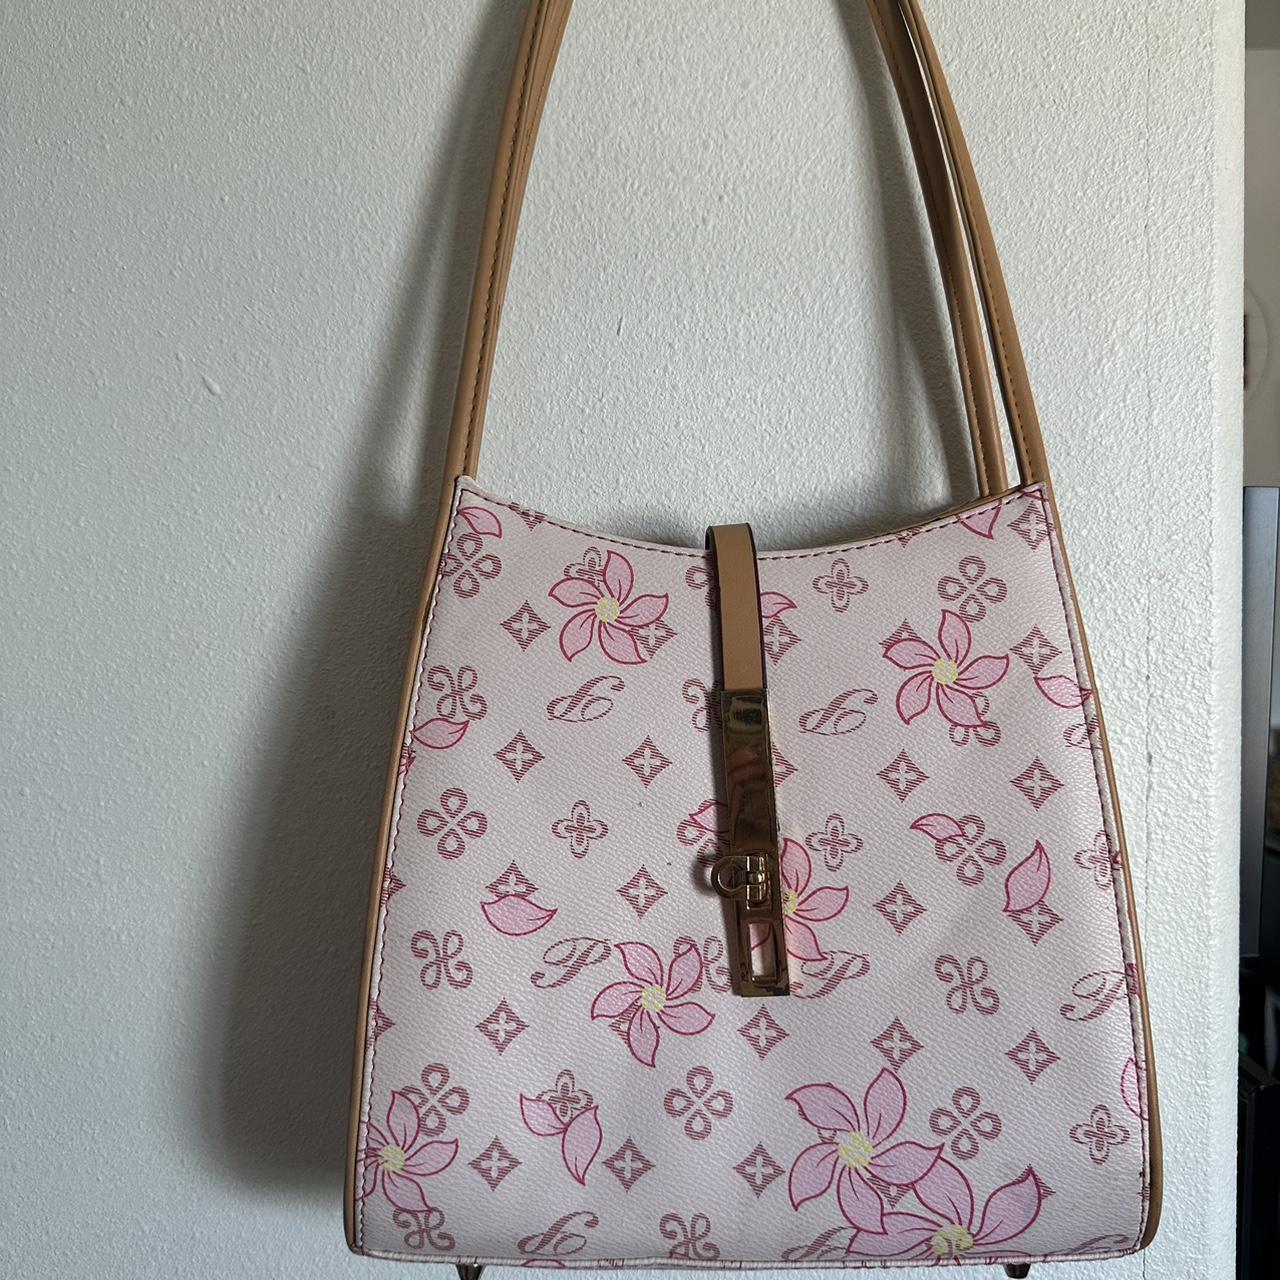 P flower print purse tags are for exposure Flaws - Depop